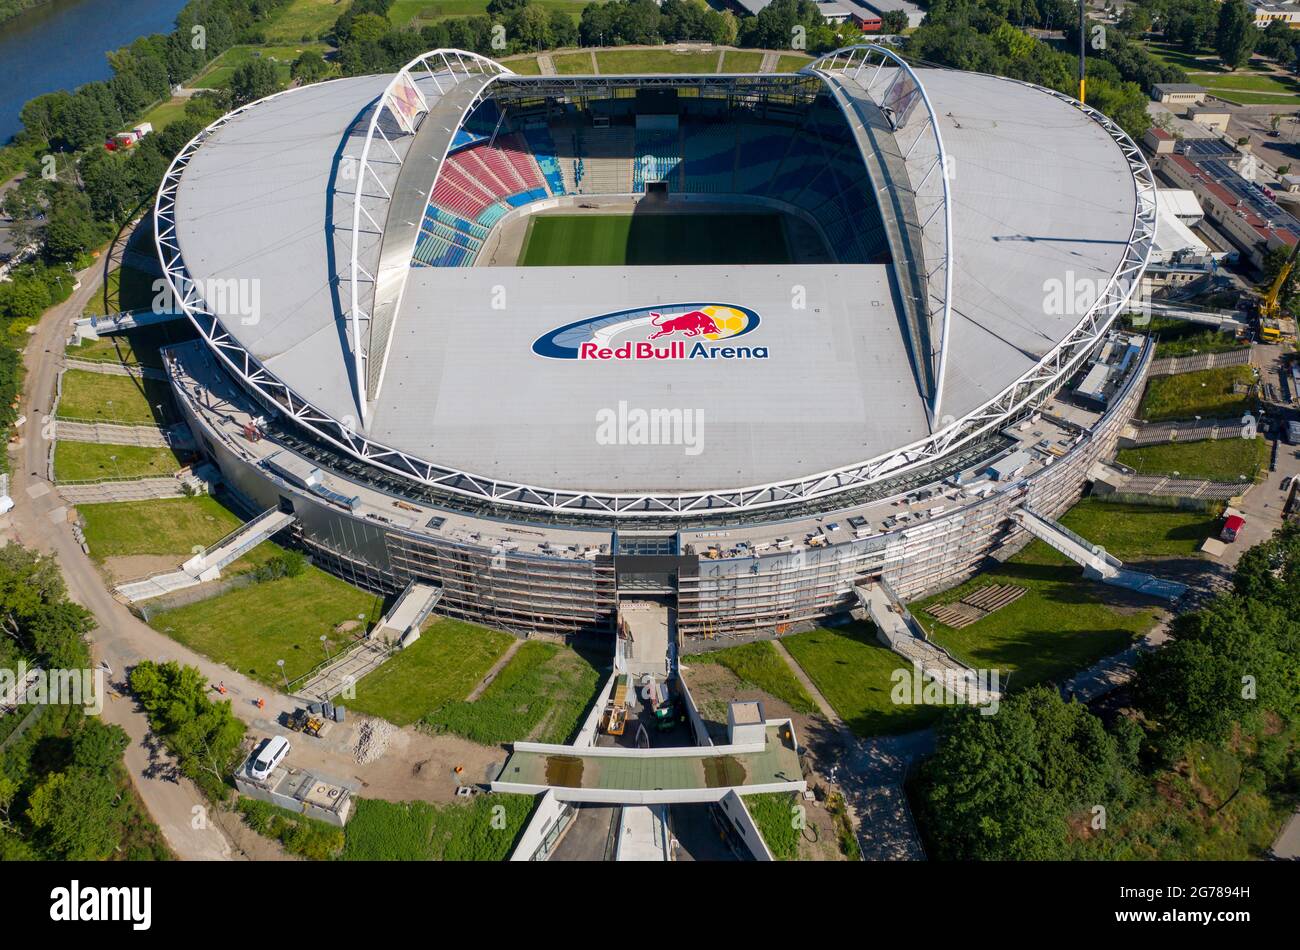 overholdelse Trænge ind Caroline 14 June 2021, Saxony, Leipzig: Two cranes stand at the Red Bull Arena. RB  Leipzig's home ground is being rebuilt. The spectator capacity increases  from 42,558 to 47,069 standing and seated. The